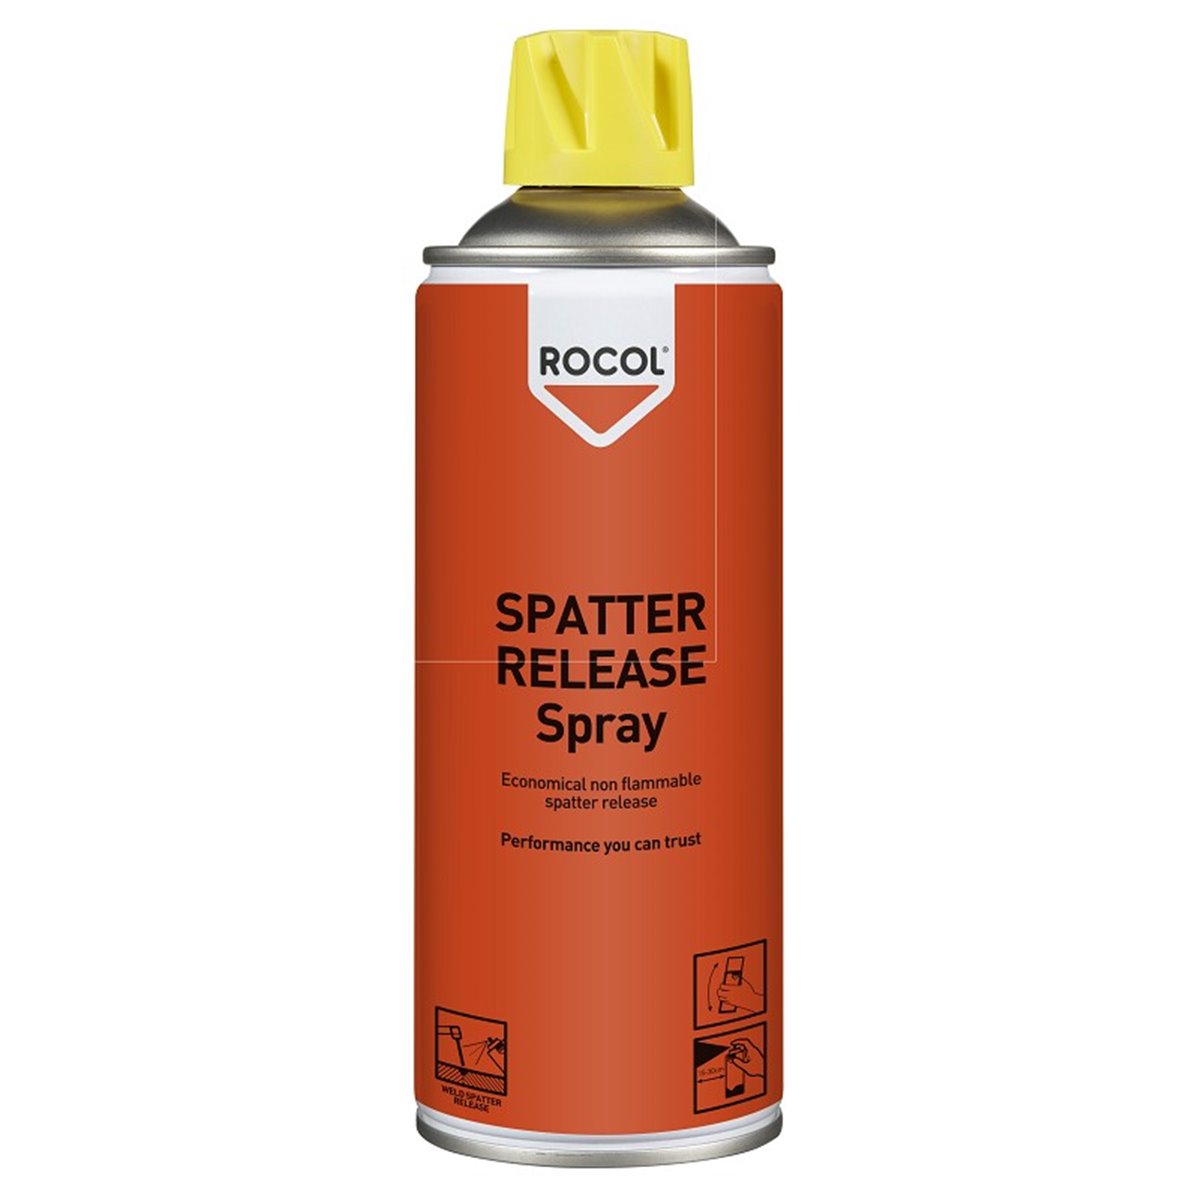 SPATTER RELEASE Spray Rocol 400ml RS66080